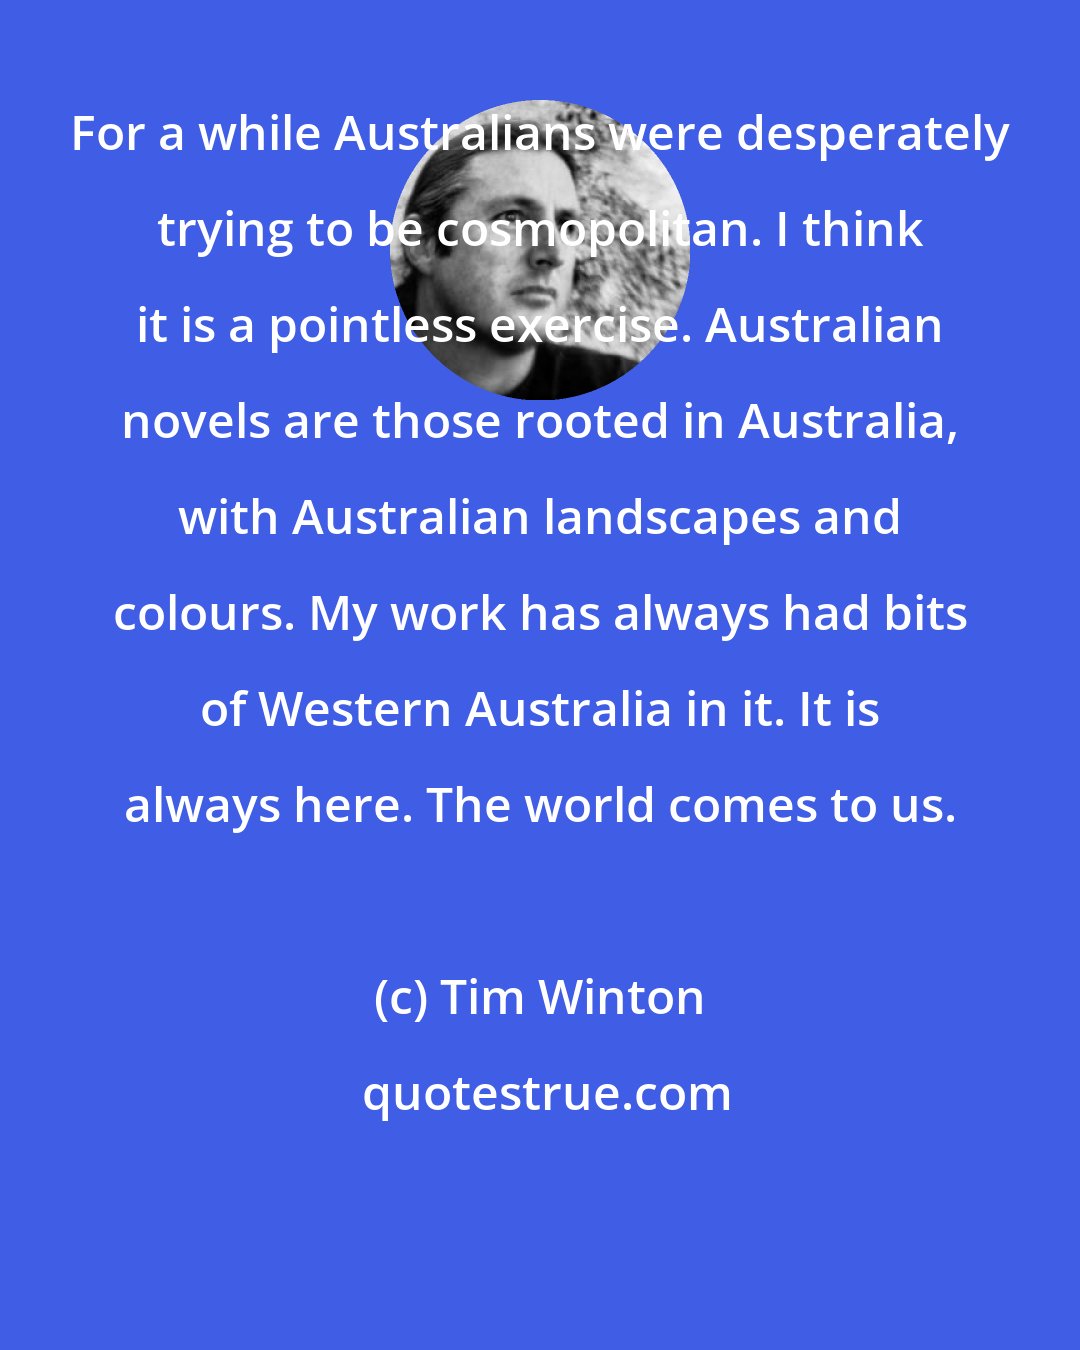 Tim Winton: For a while Australians were desperately trying to be cosmopolitan. I think it is a pointless exercise. Australian novels are those rooted in Australia, with Australian landscapes and colours. My work has always had bits of Western Australia in it. It is always here. The world comes to us.